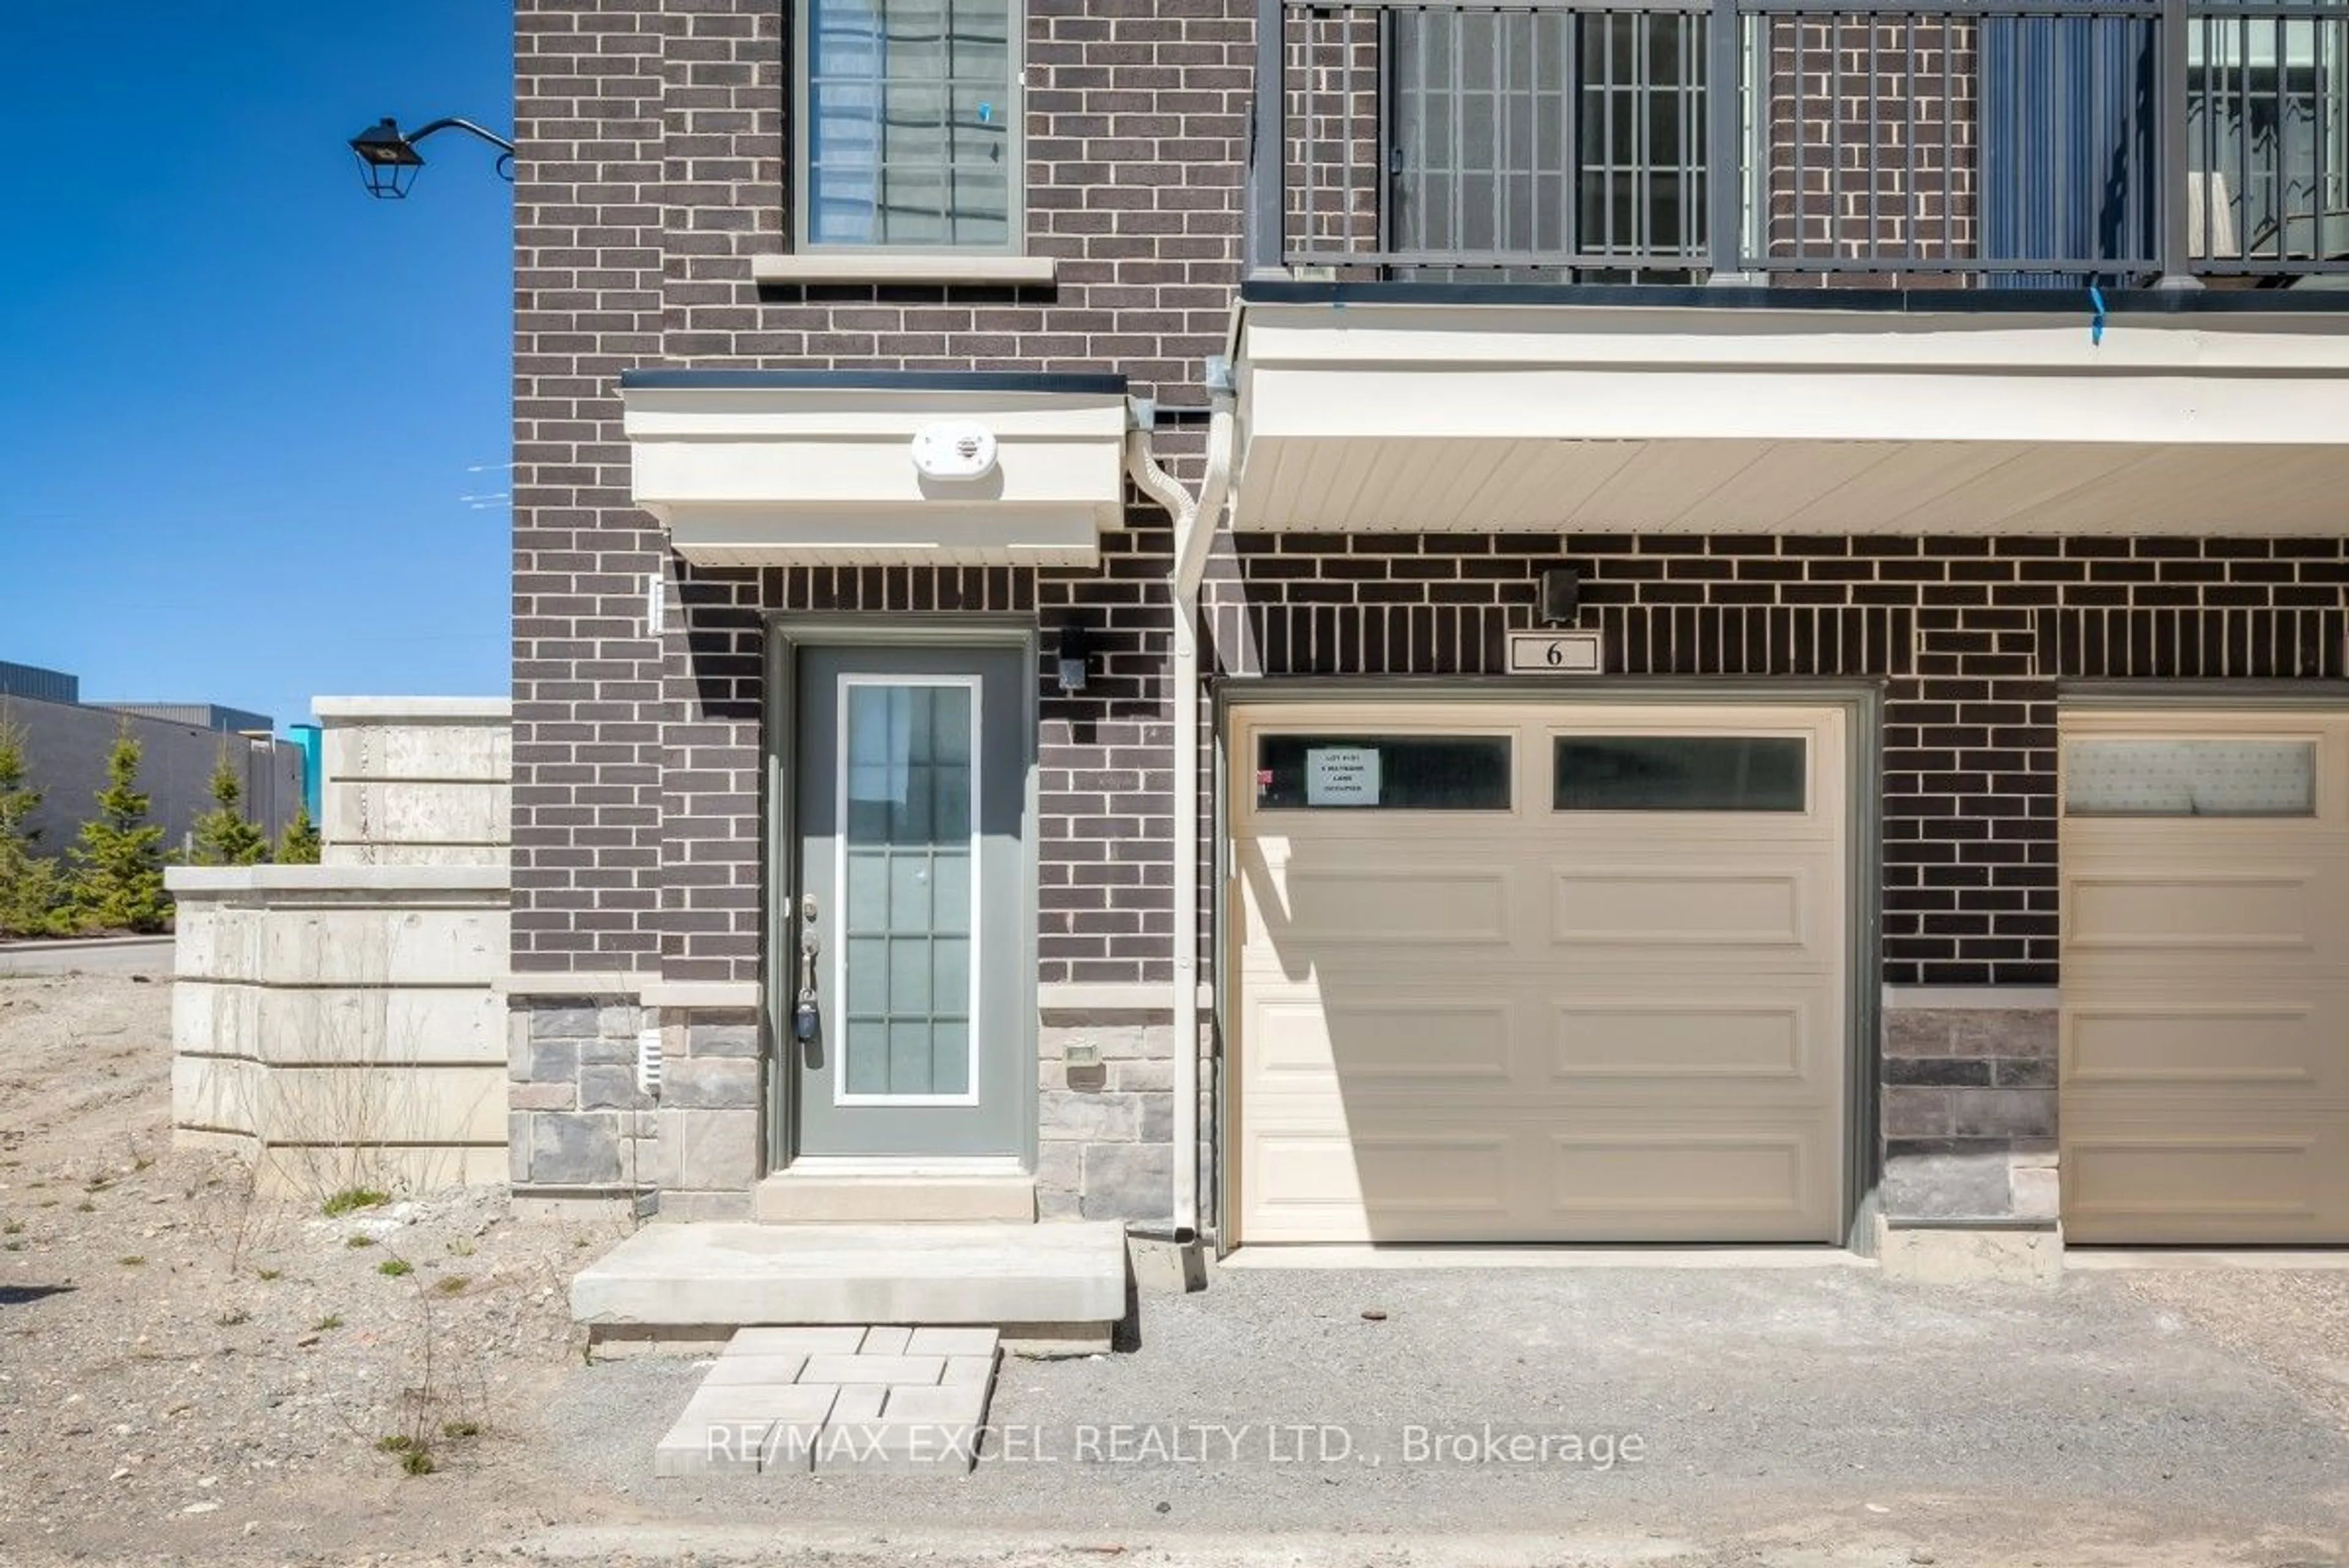 Home with brick exterior material for 6 Maybank Lane, Whitchurch-Stouffville Ontario L4A 4X7